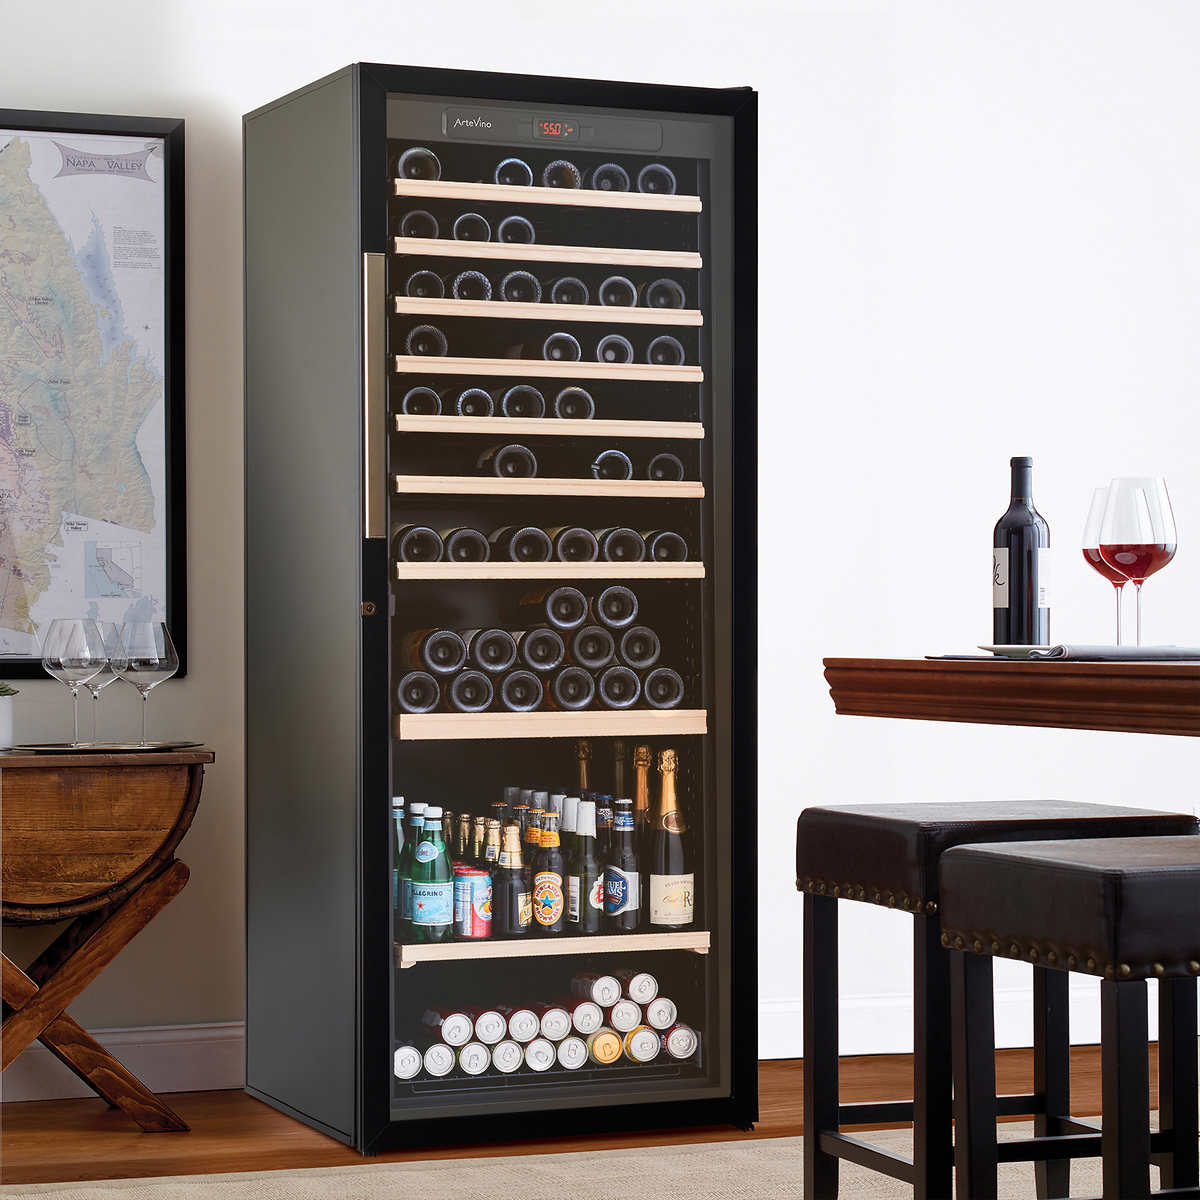 Artevino Ii By Eurocave Wine And Beverage Center